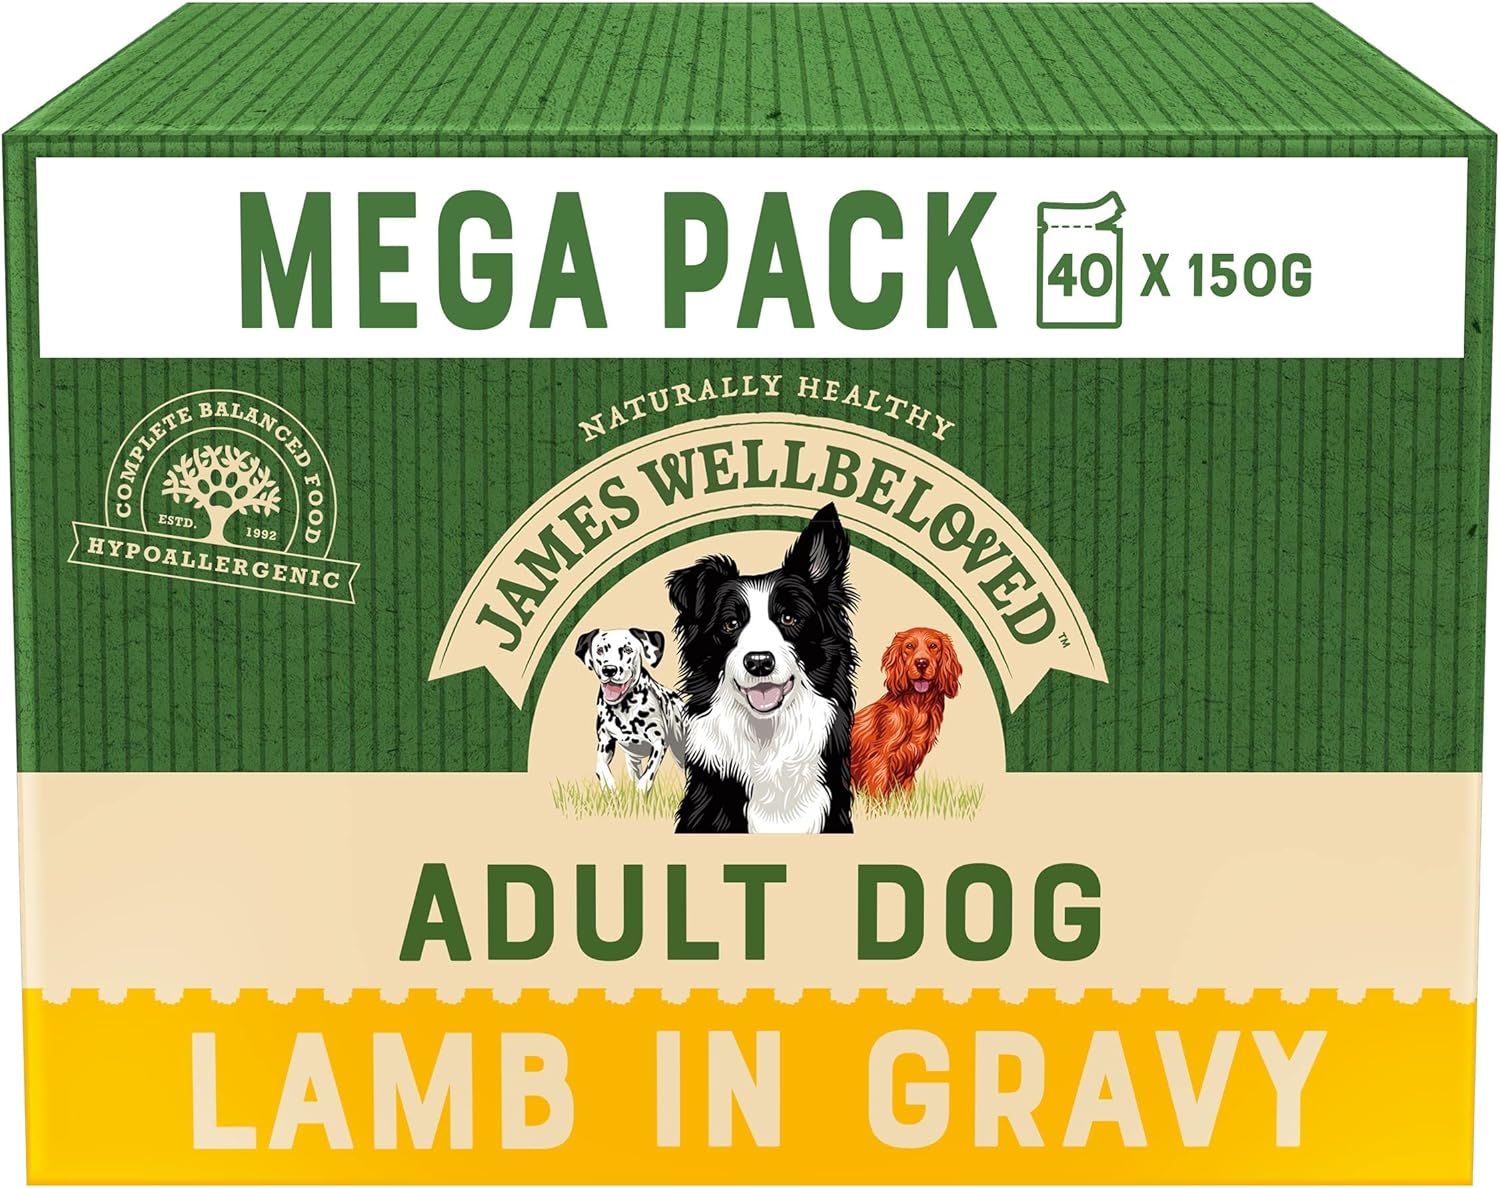 James Wellbeloved Adult Lamb in Gravy 40 Pouches, Hypoallergenic Wet Dog Food, Pack of 1 (40x150 g)?9003579016879